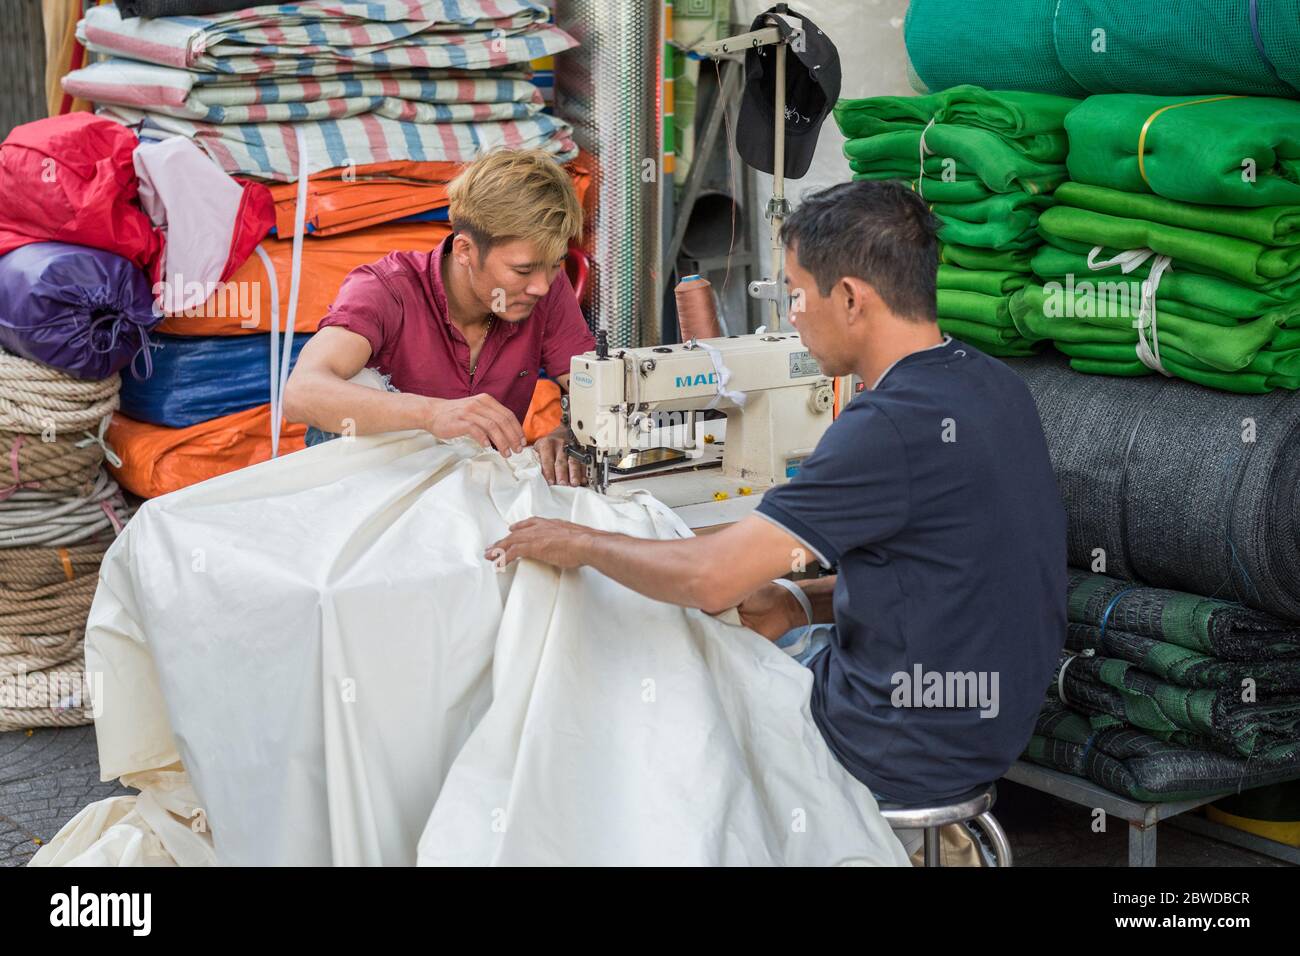 Ho Chi Minh City, Vietnam - February 11, 2019: Vietnamese men stitch a fabric with a sewing machine in the street near their small shop. Stock Photo